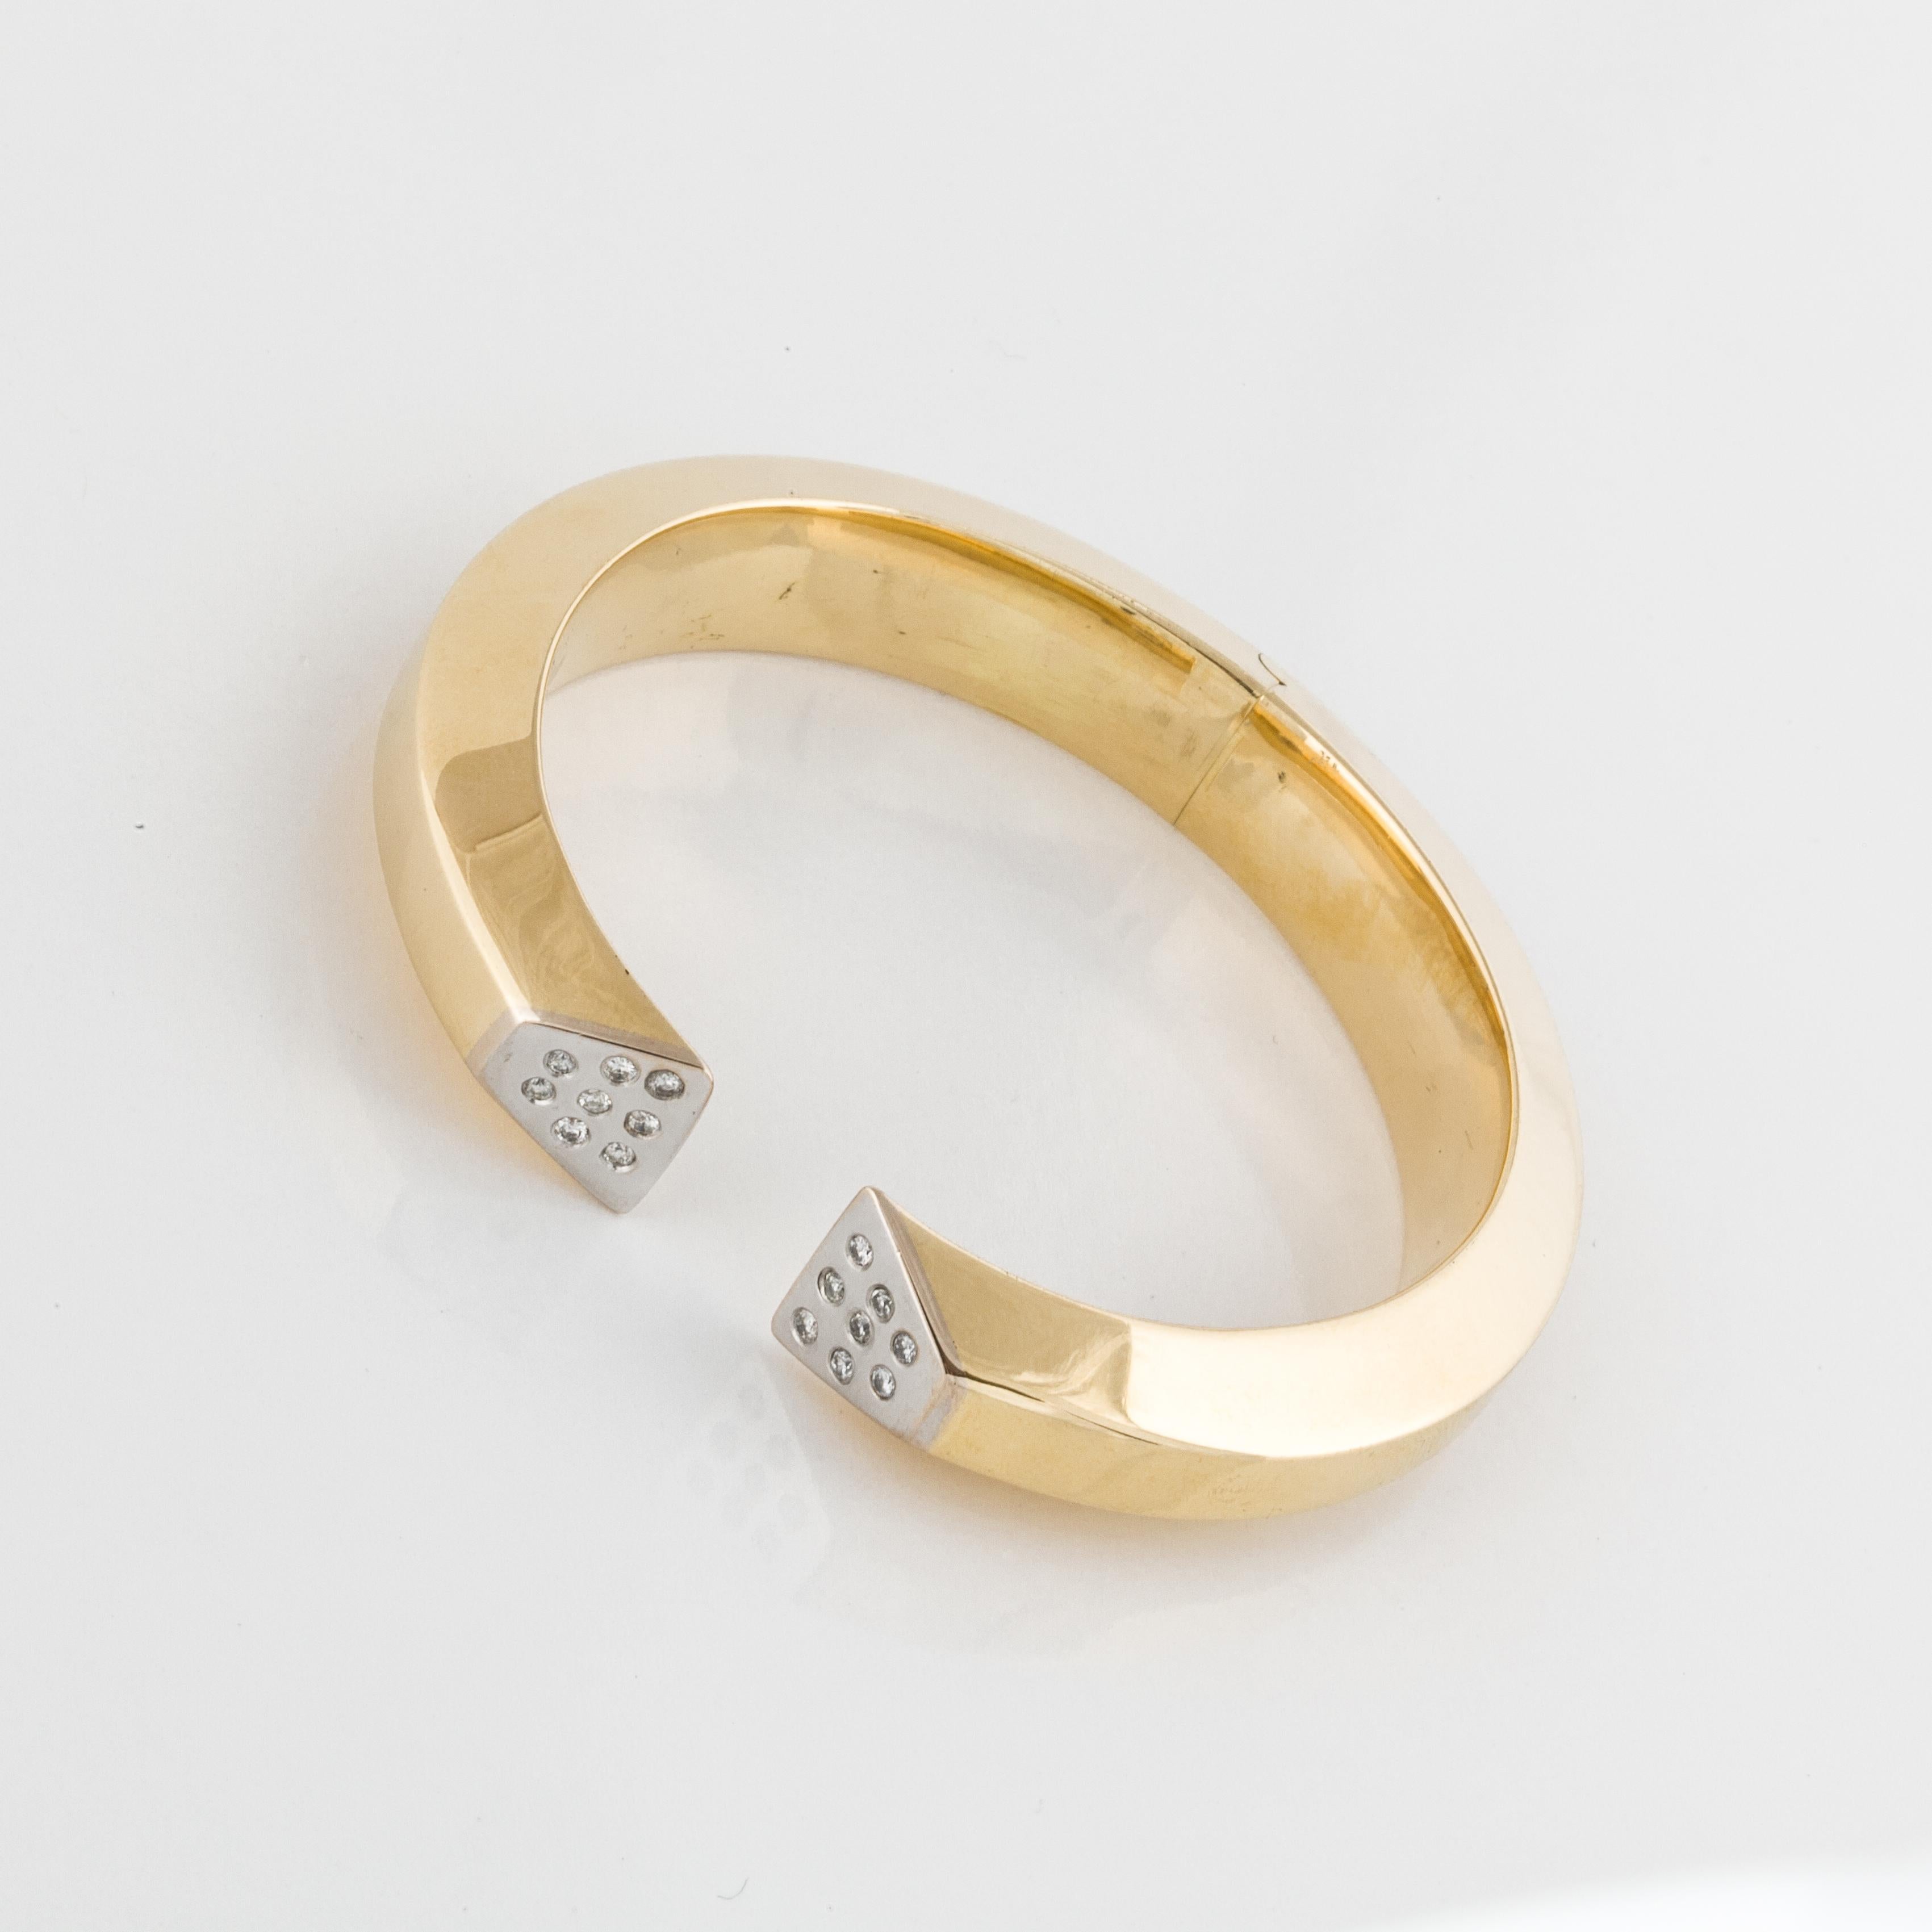 Modern hinged bracelet in 18K yellow gold with round diamonds set in 18K white gold.  There are sixteen round diamonds totaling 0.35 carats; G-H color and SI1-I1 clarity.  The top is 7/16 inches wide and the inside diameter is 2 3/16 inches.  